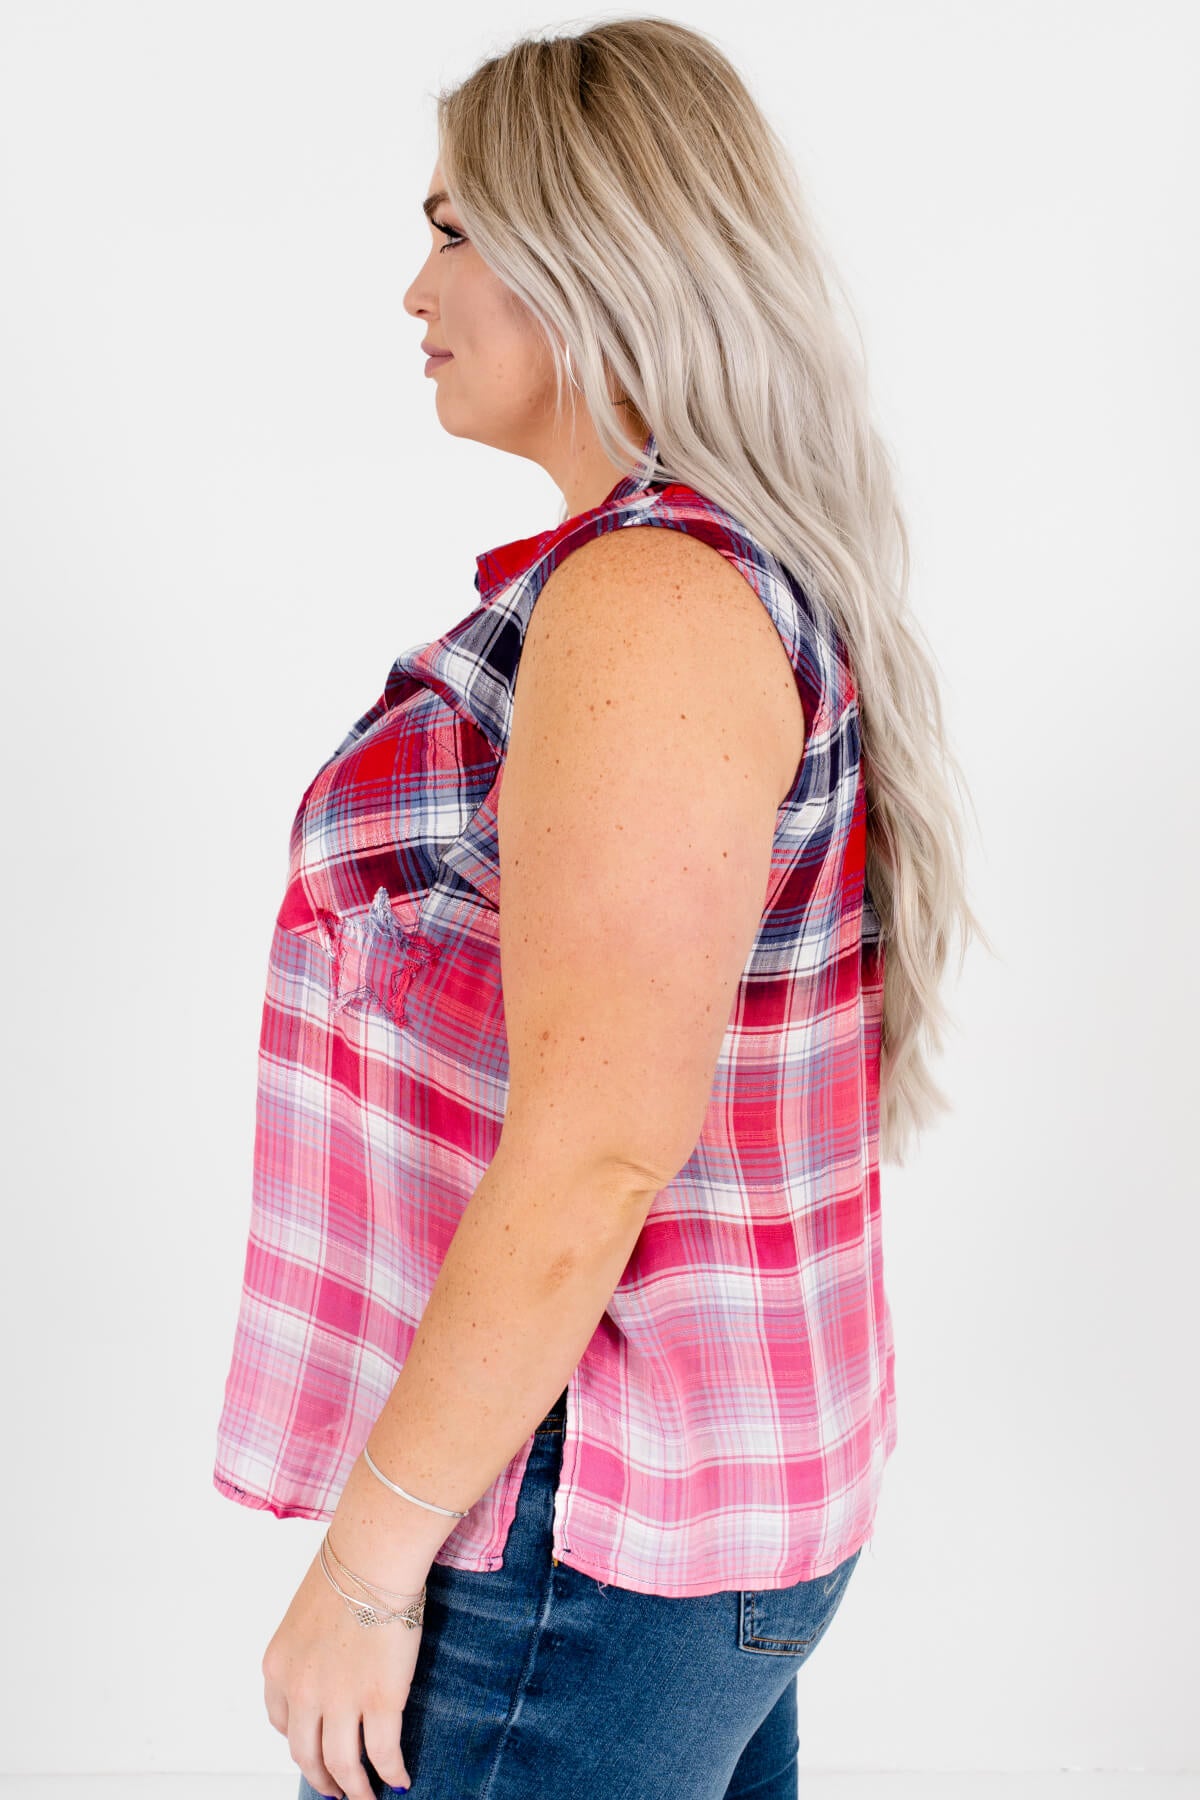 Red Navy White Plaid Tank Tops Plus Size Boutique 4th of July Outfits